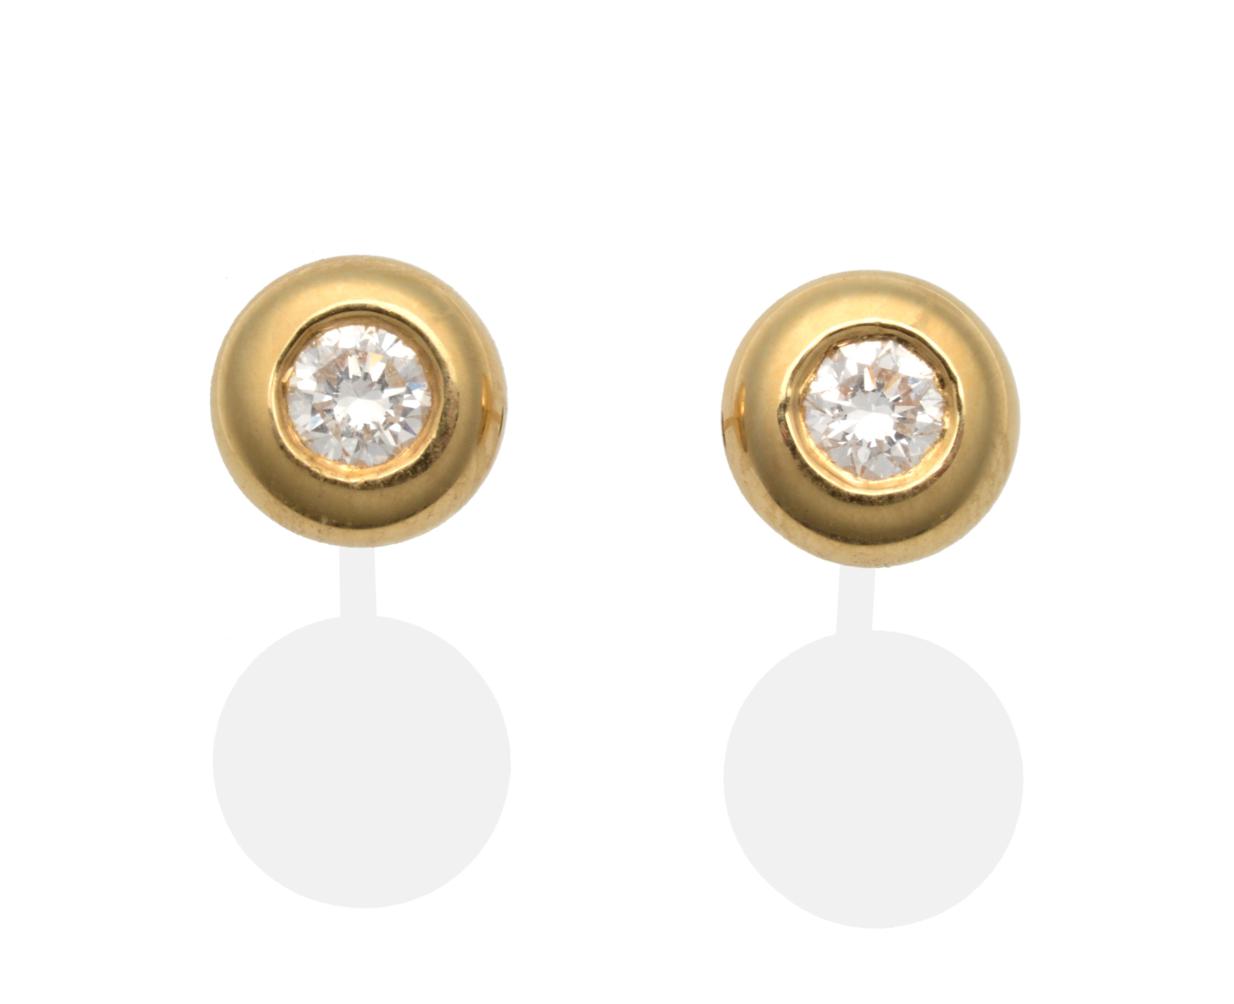 A Pair of 18 Carat Gold Diamond Solitaire Earrings, a round brilliant cut diamond in a broad